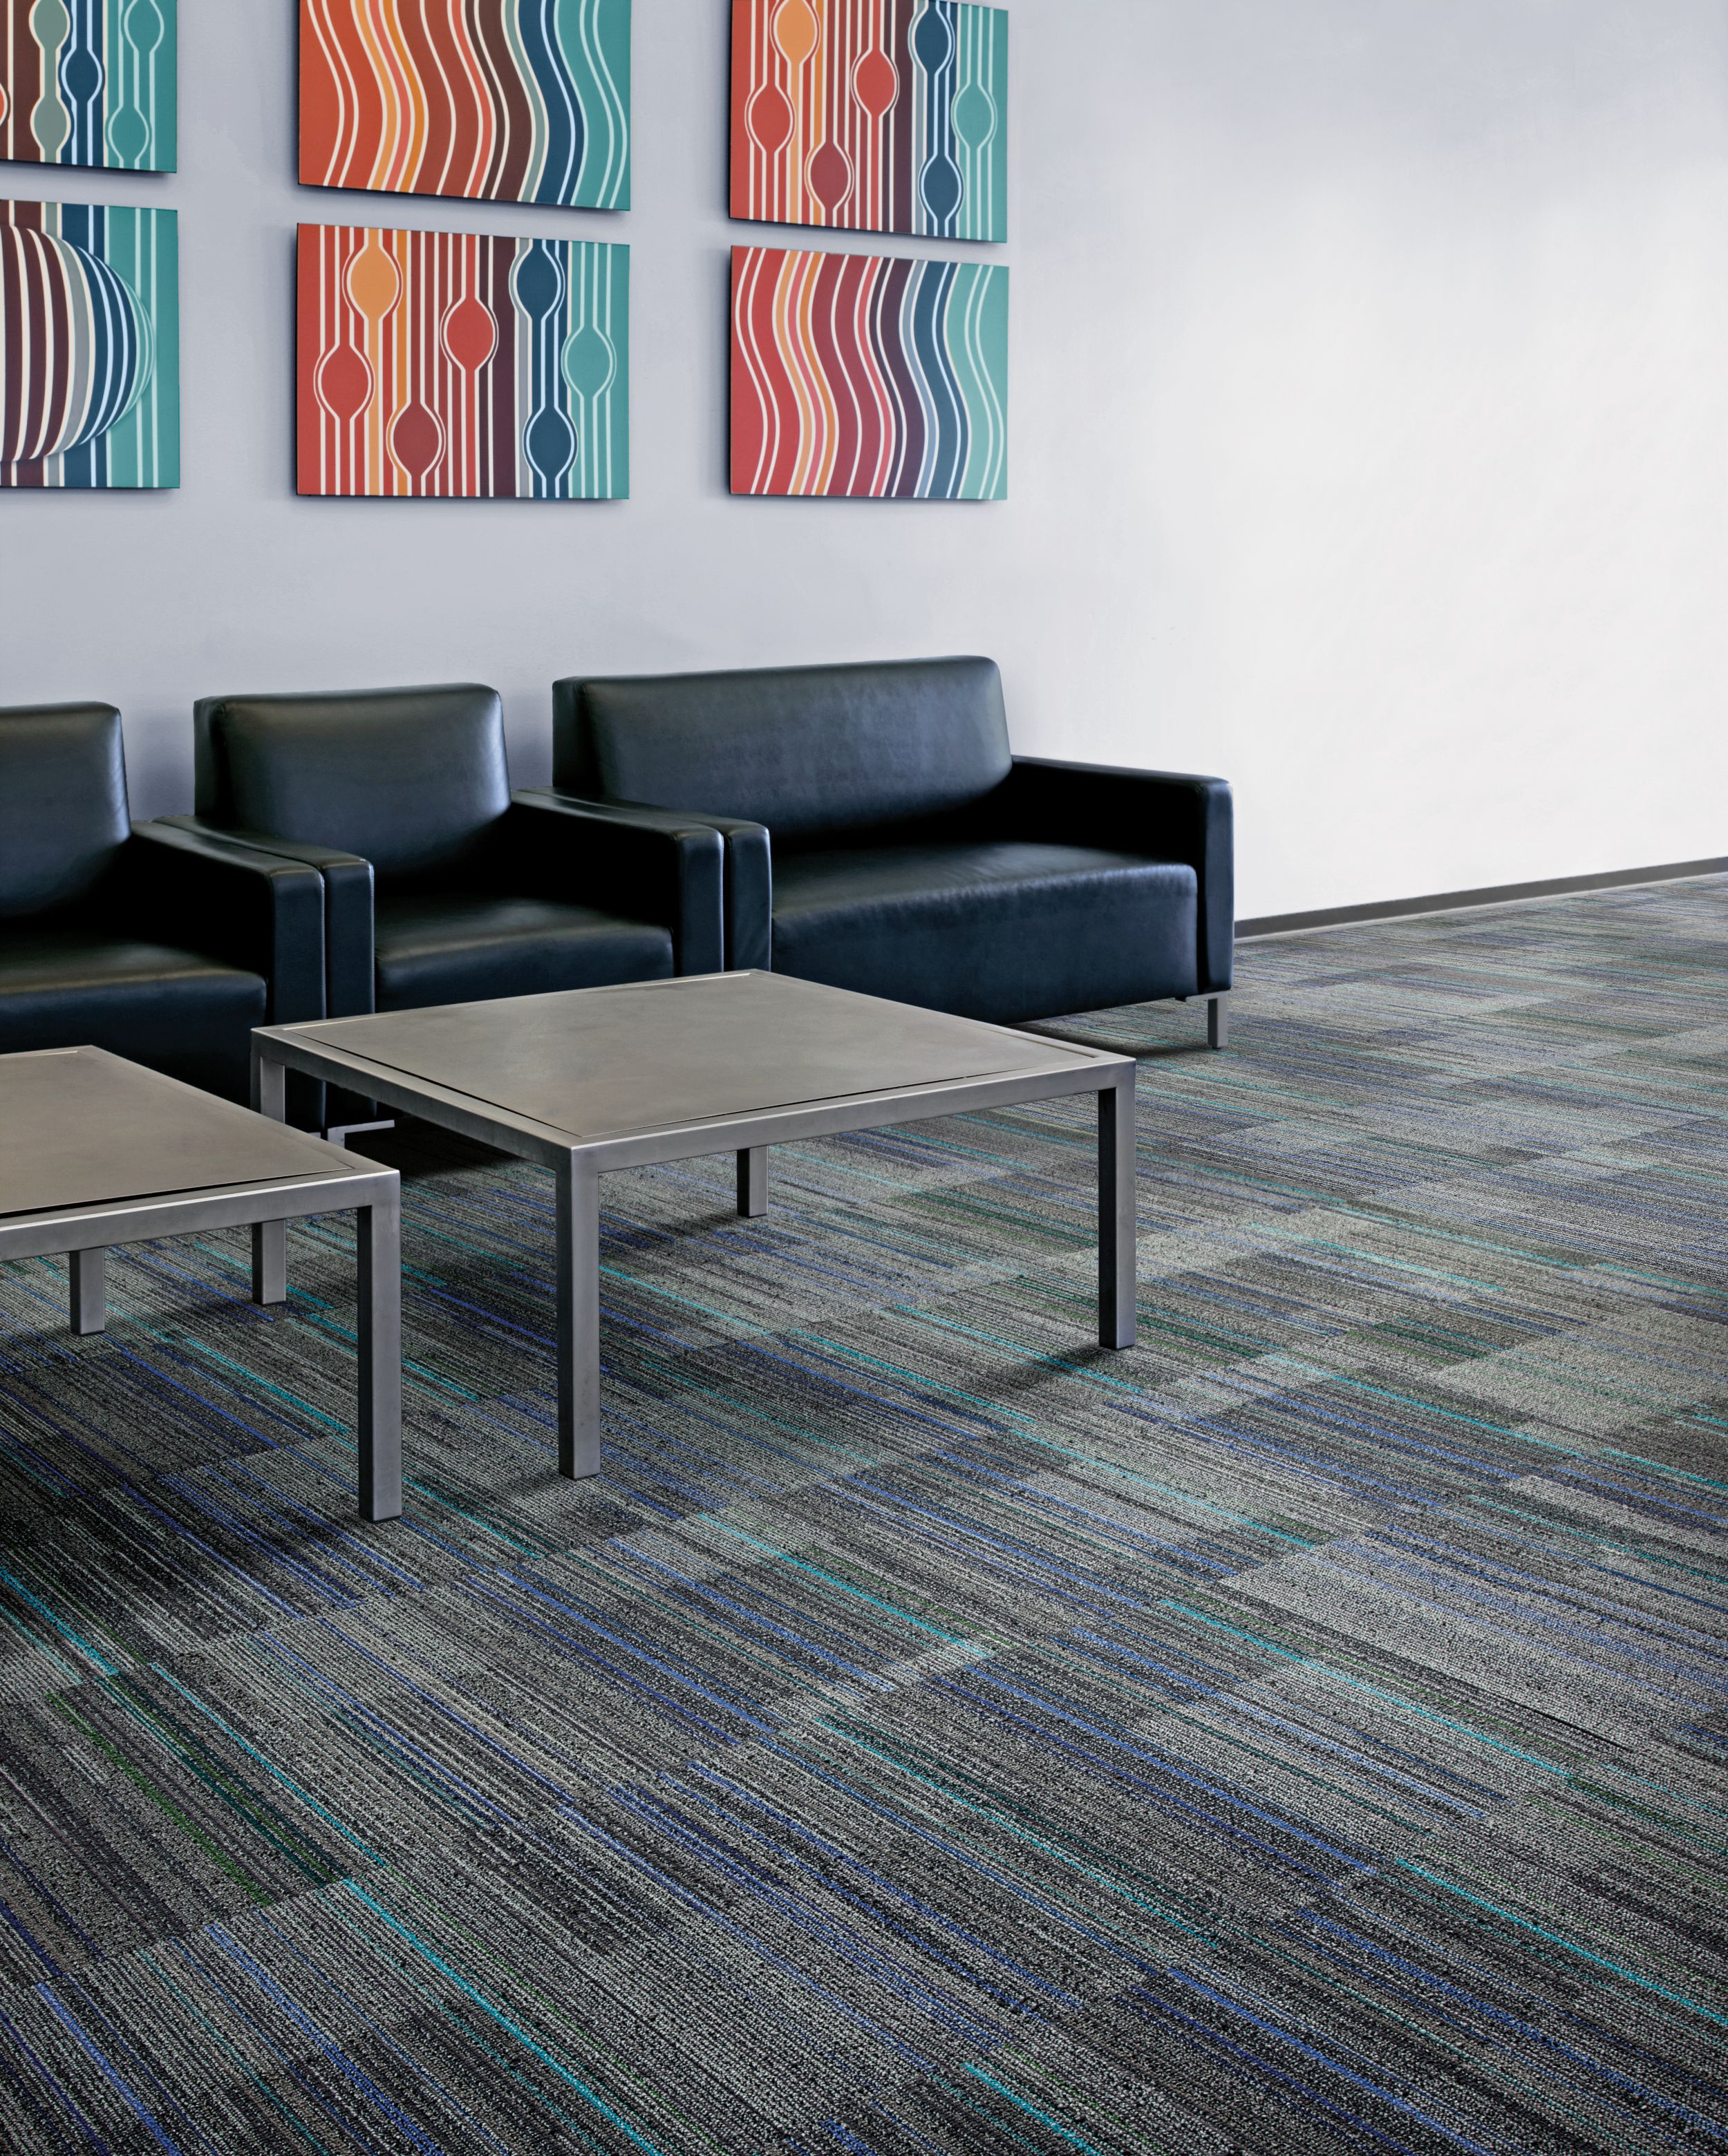 Interface Straight Edge carpet tile in waiting area with table and chairs imagen número 5